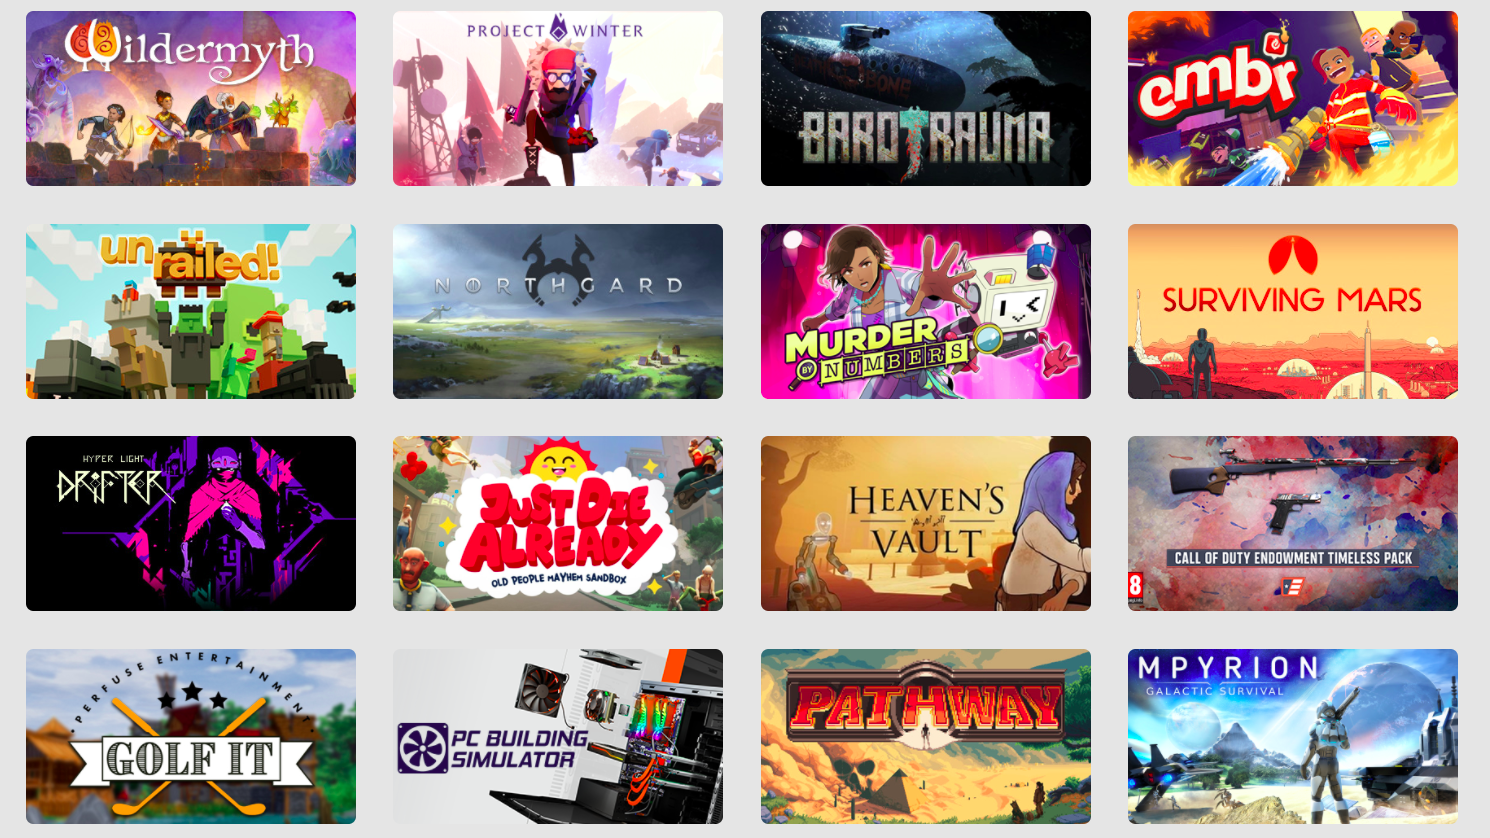 The Jingle Jam Games Collection offers 55+ games if you donate to